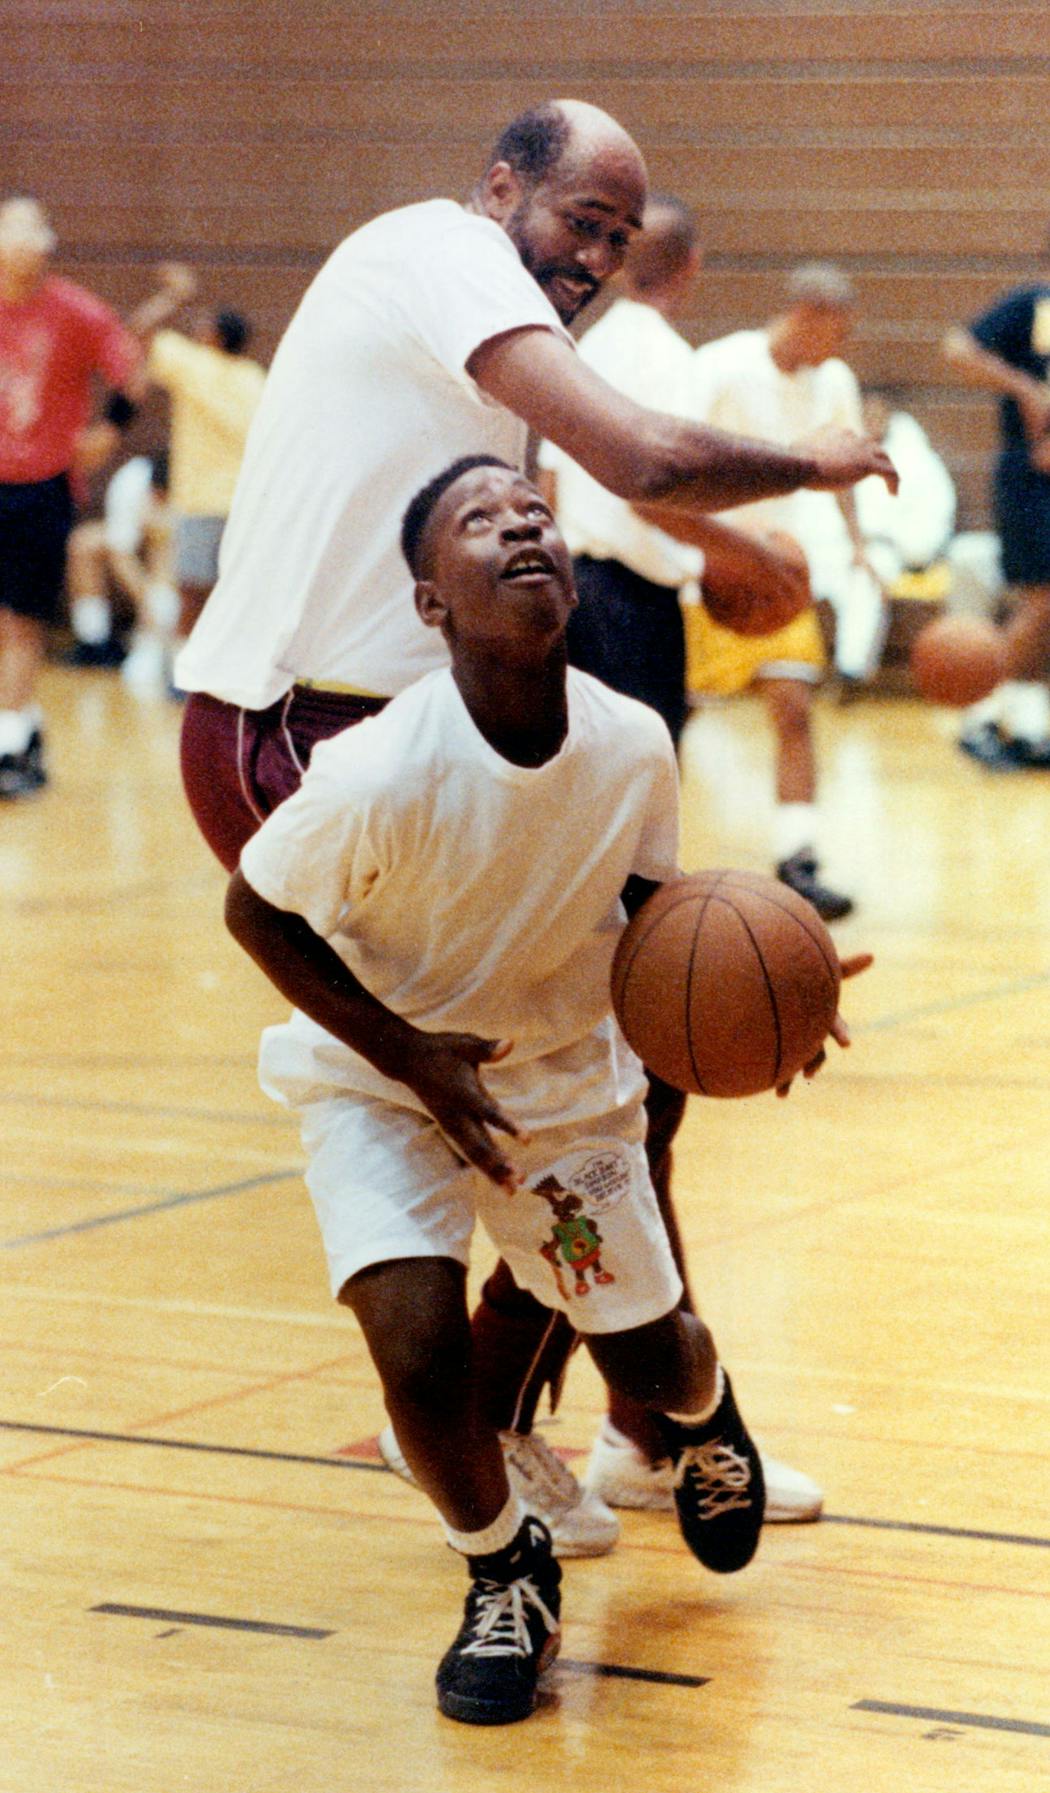 Clyde Turner kept this Star Tribune photo from 1991 prominently displayed, it shows Kolliepaye Kpowulu blowing past Turner for a layup during a camp session.